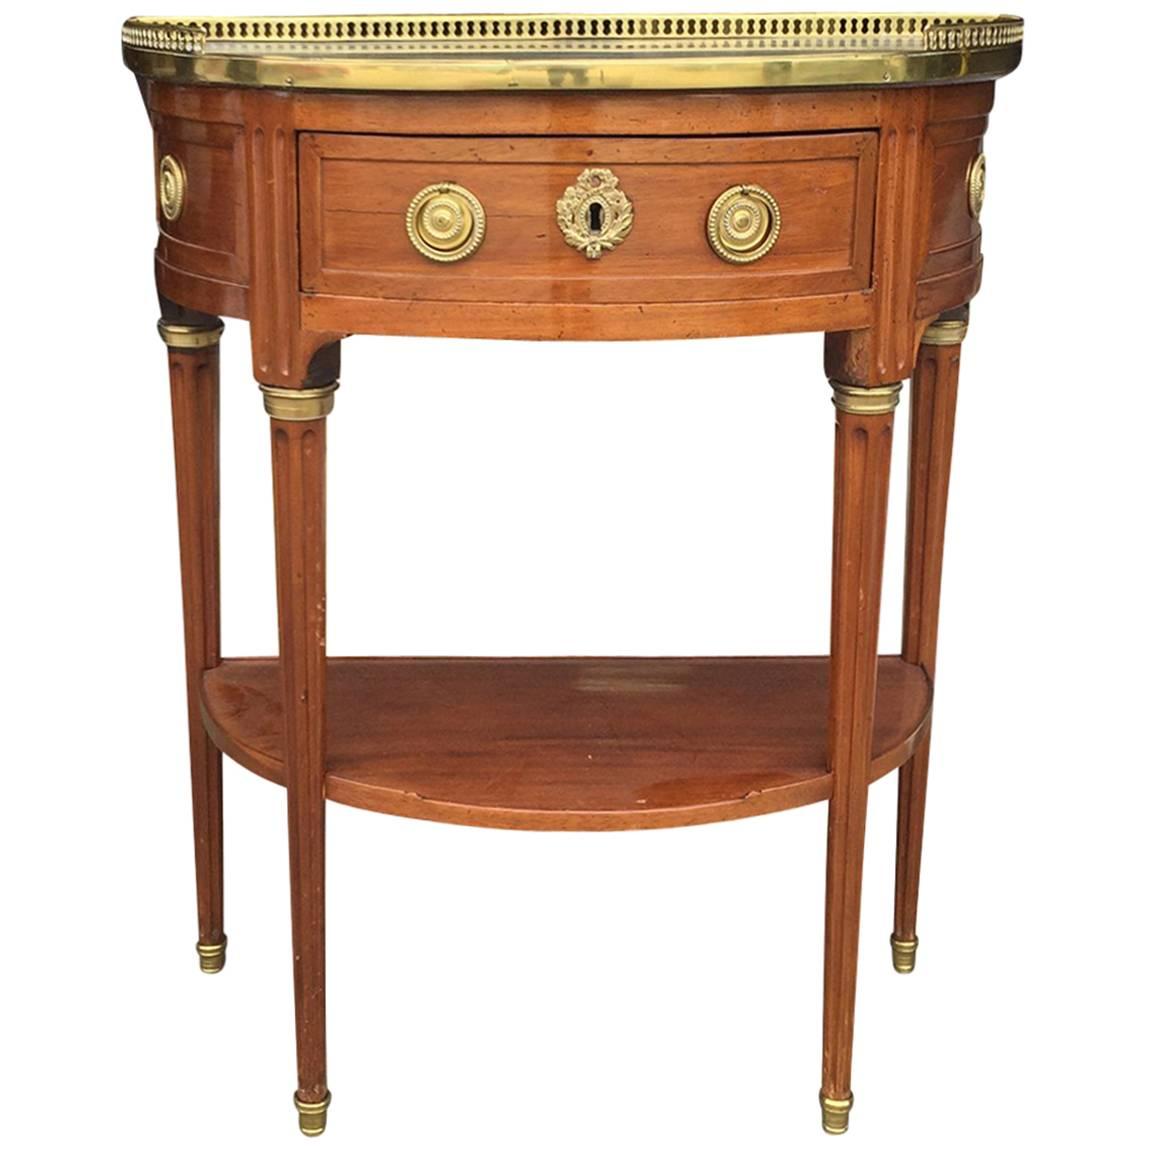 18th-19th Century Louis XVI Style Marble-Top and Brass-Mounted Mahogany Console